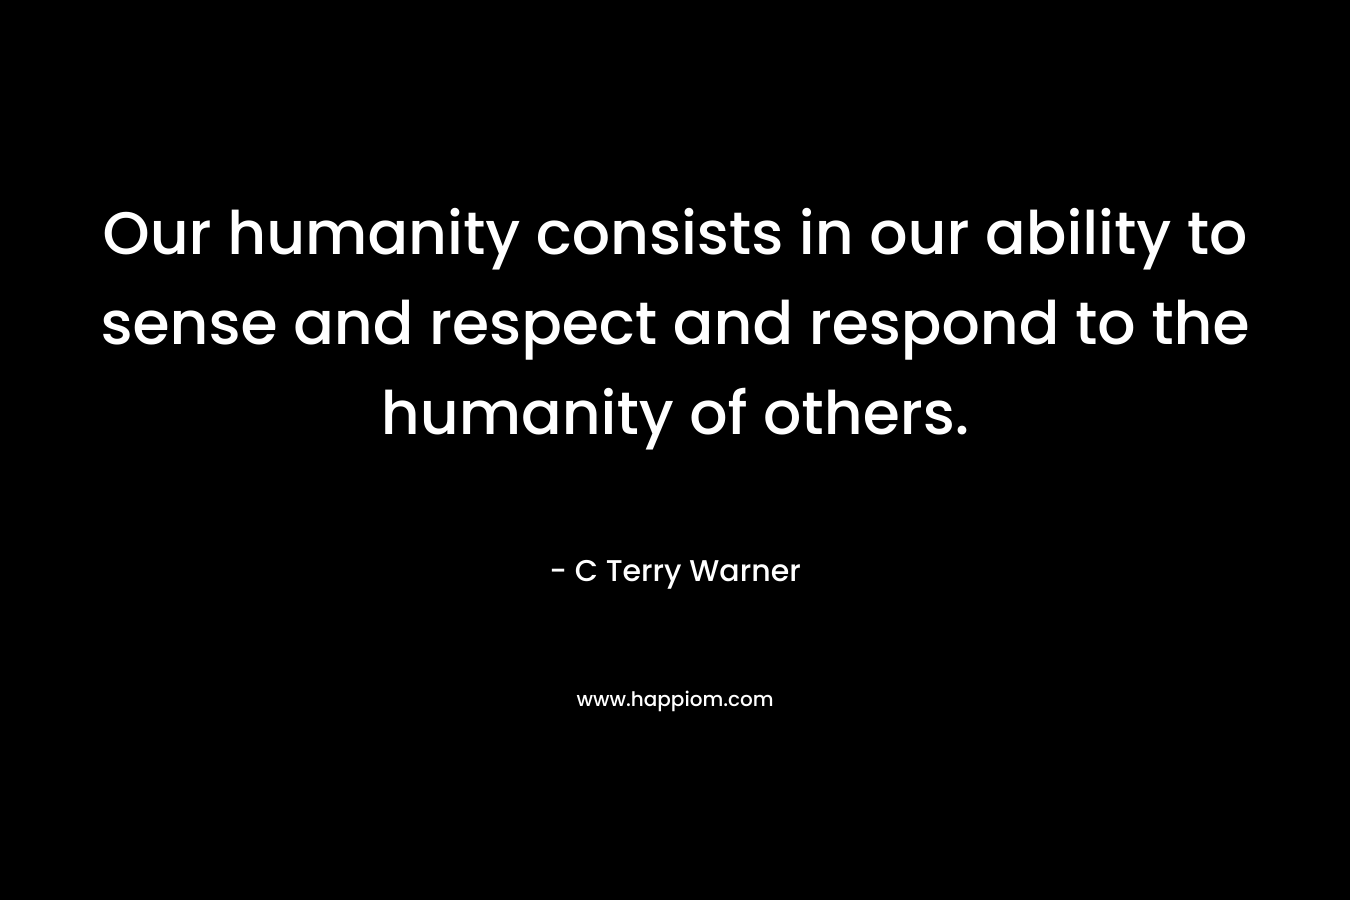 Our humanity consists in our ability to sense and respect and respond to the humanity of others. – C Terry Warner